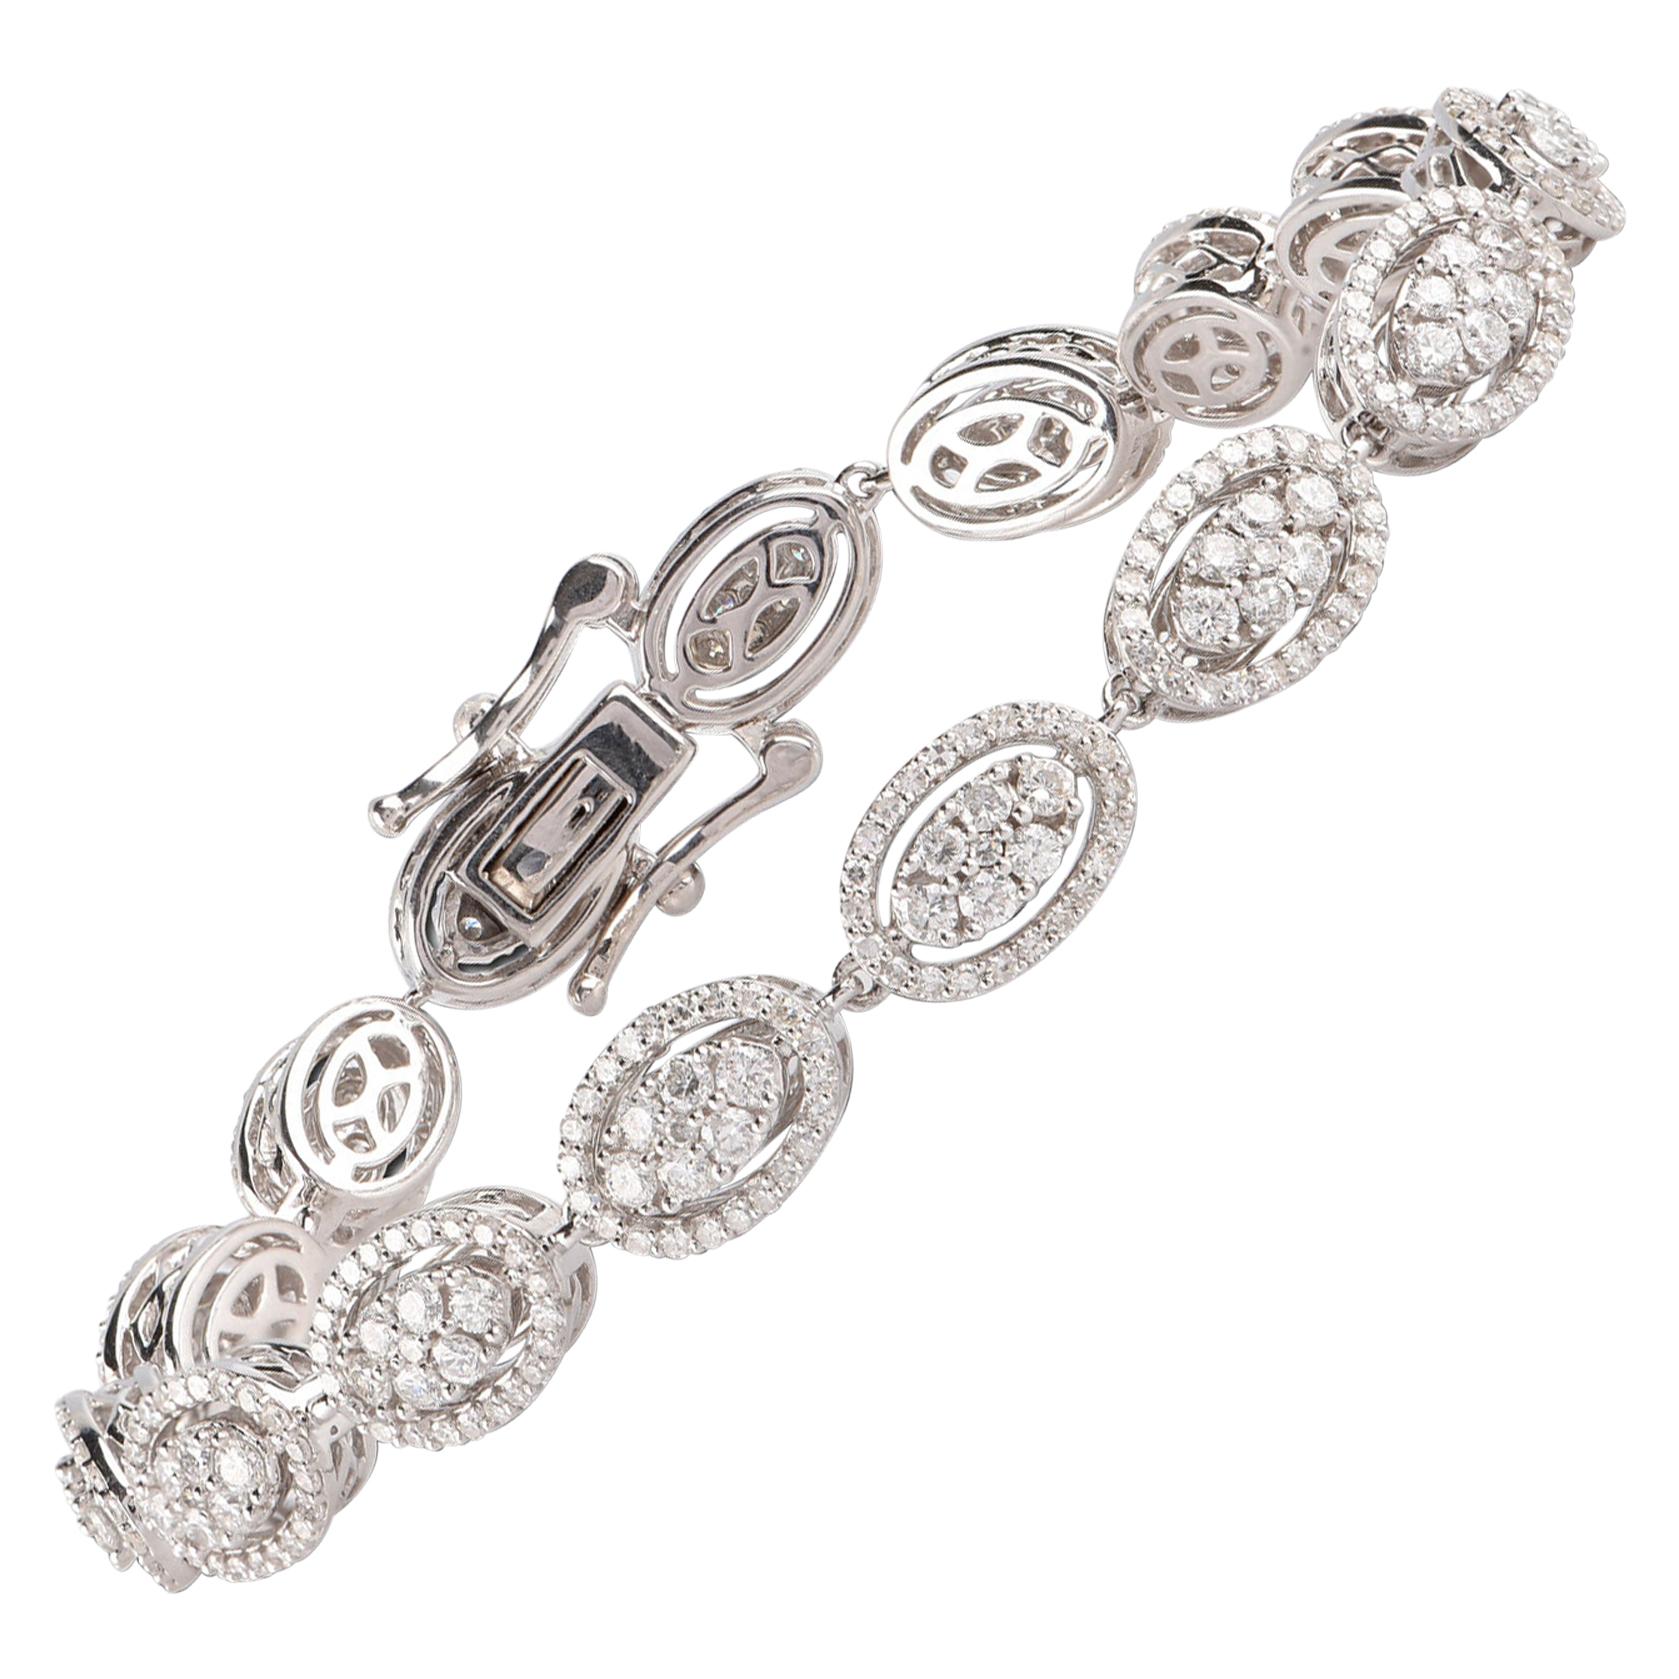 A graceful addition to her wardrobe, this diamond link bracelet brings the perfect touch of sparkle to her look. Glitters with 435 brilliant-cut diamonds set elegantly in prong setting and crafted in 14-karat white gold. Diamonds are graded H-I